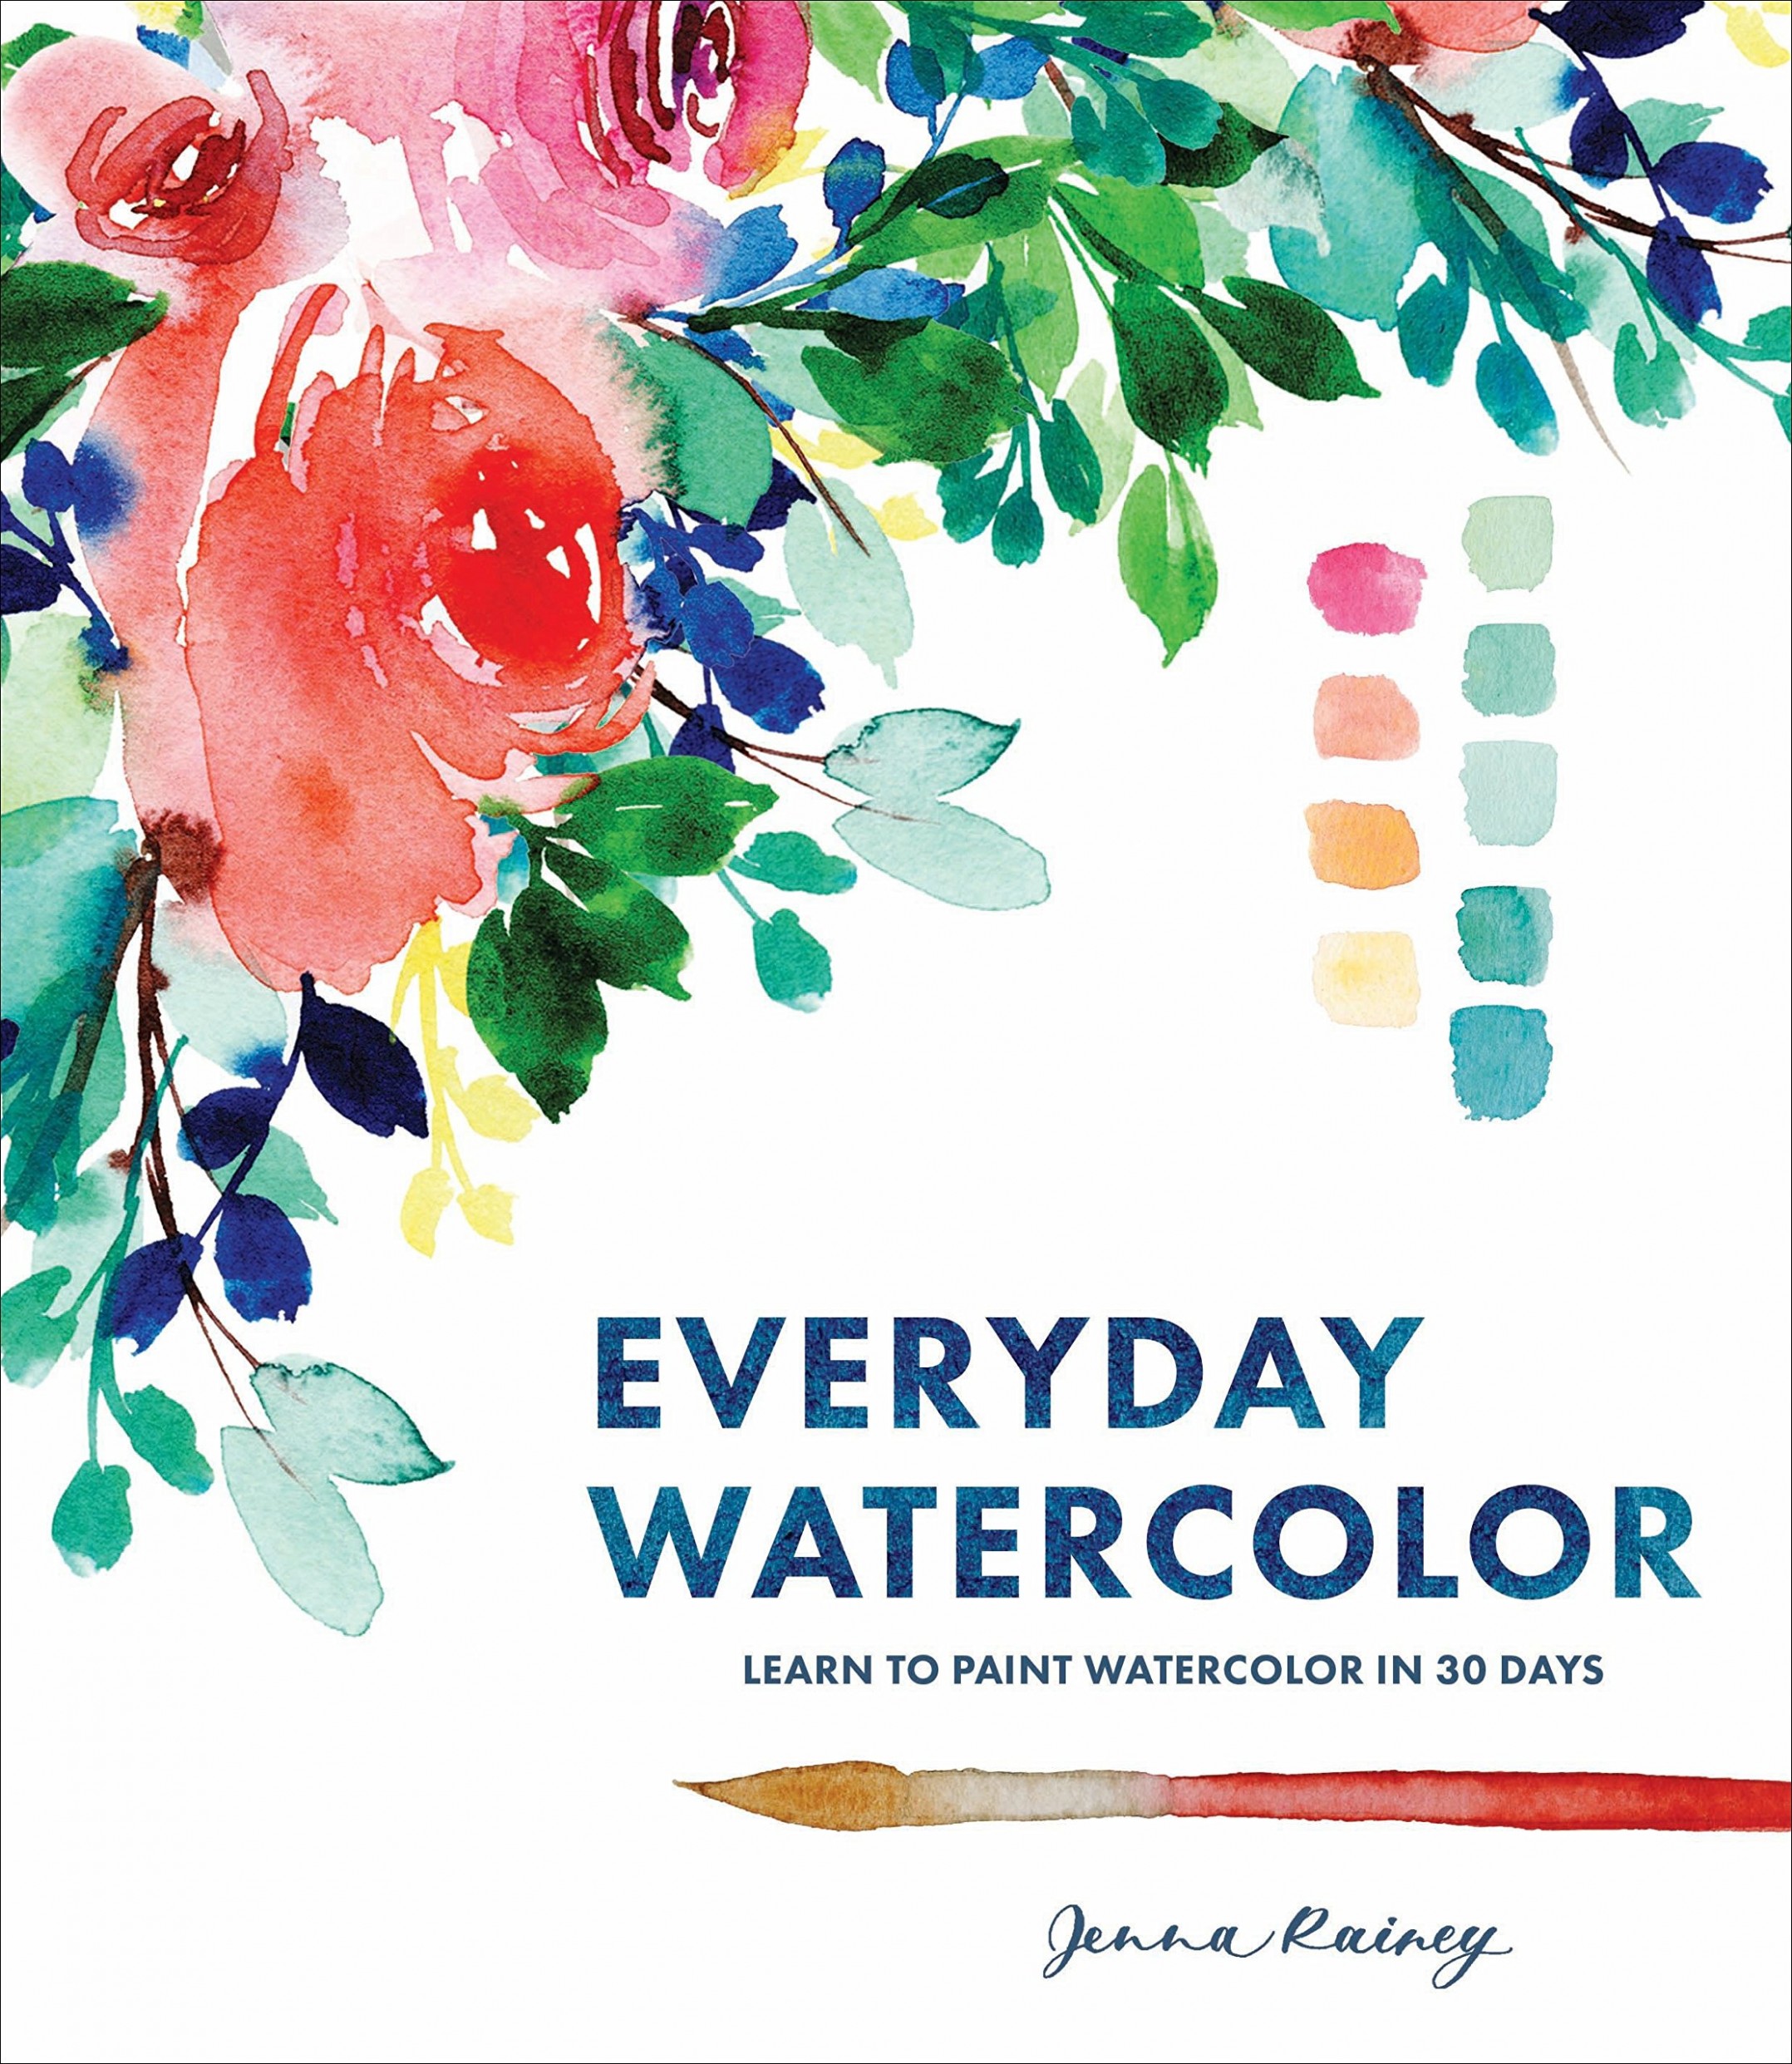 Amazon.com: Everyday Watercolor: Learn To Paint Watercolor In 7 ..